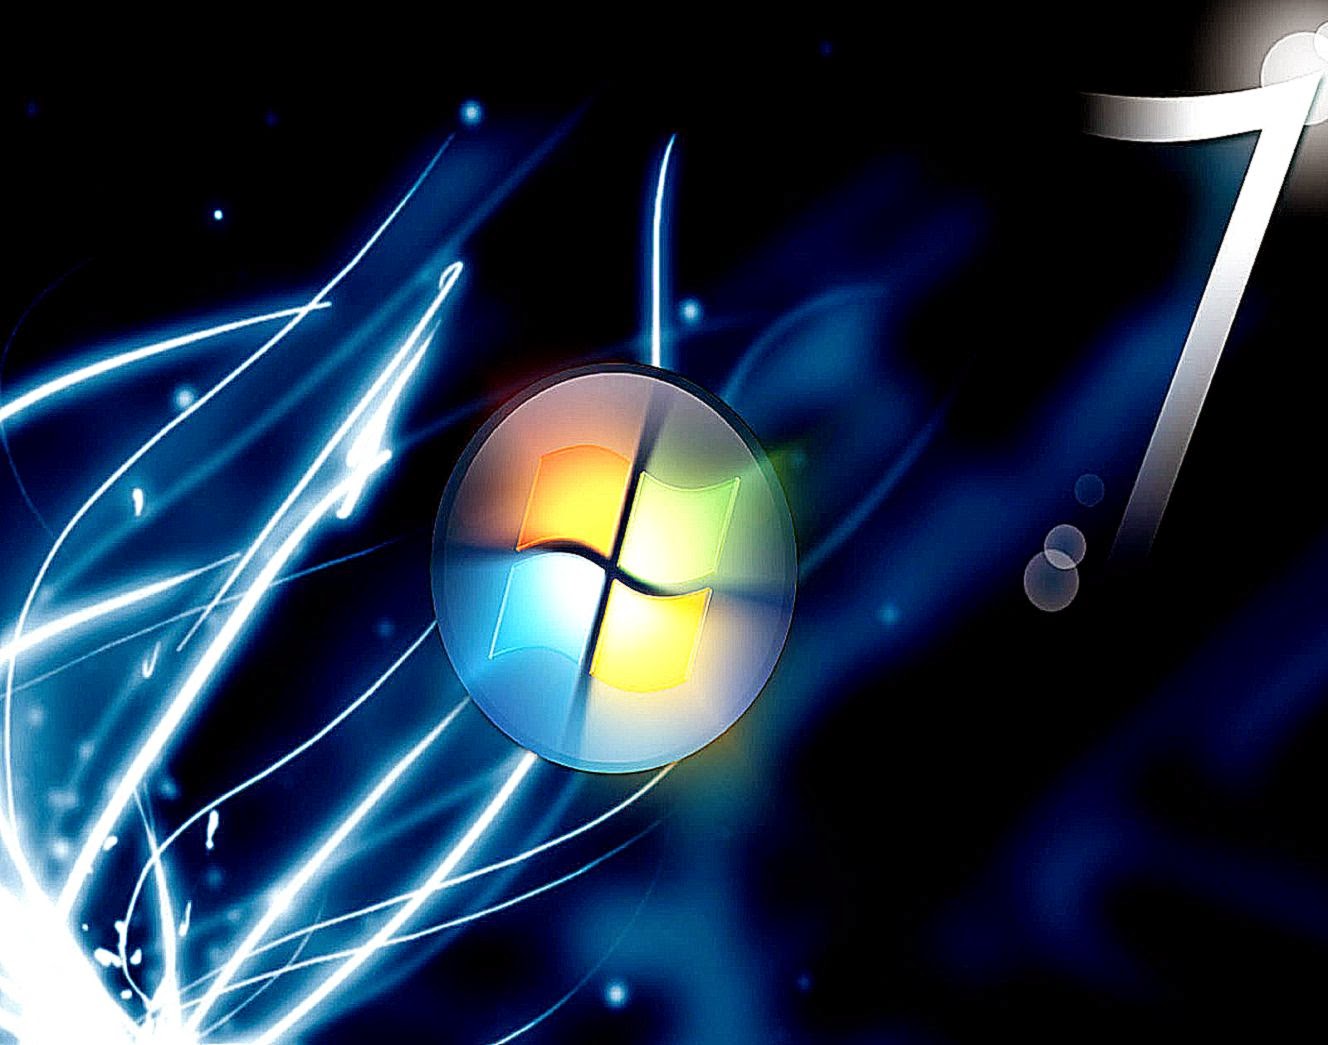 Animated Wallpapers Windows 7 Wallpapers Background 1328x1045